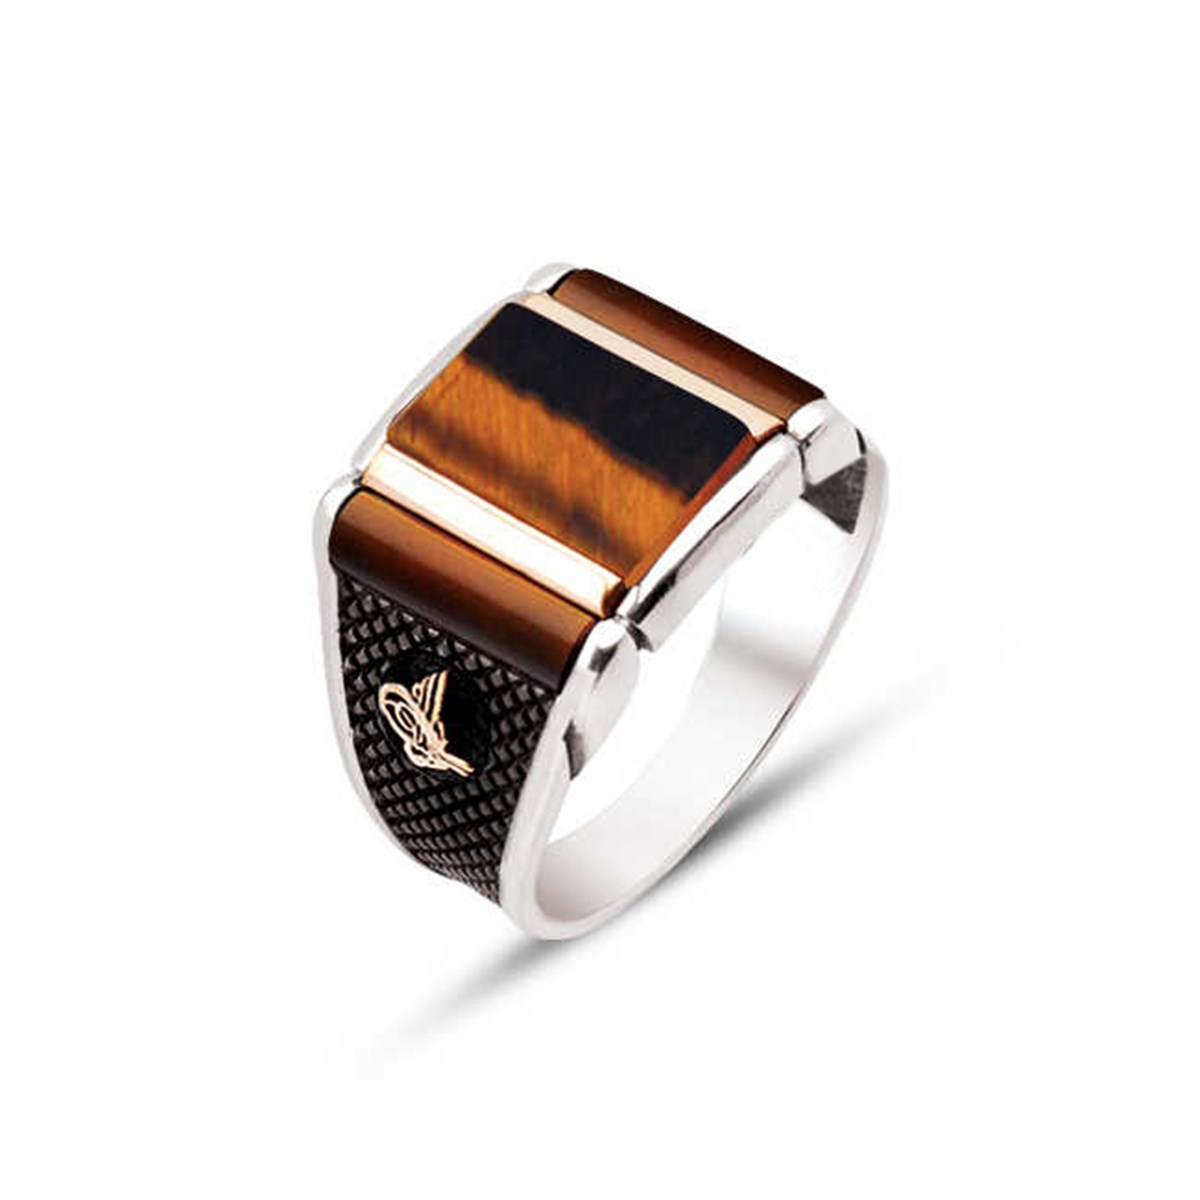 Silver Special Cut Tiger's Eye Stone Tugra Men's Ring